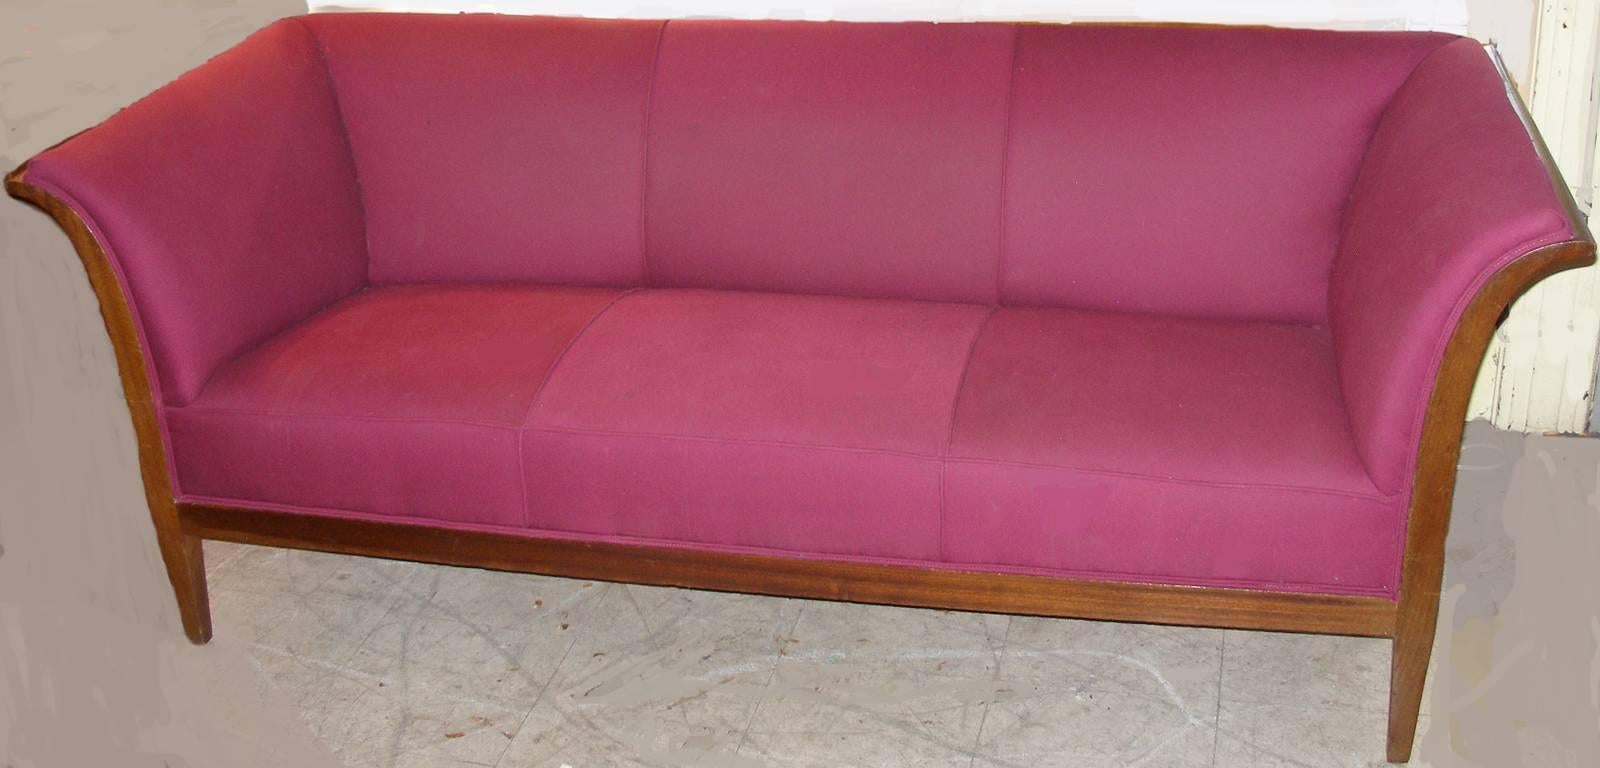 1940s mahogany frame sofa in the classical style by designer Frits Henningsen.